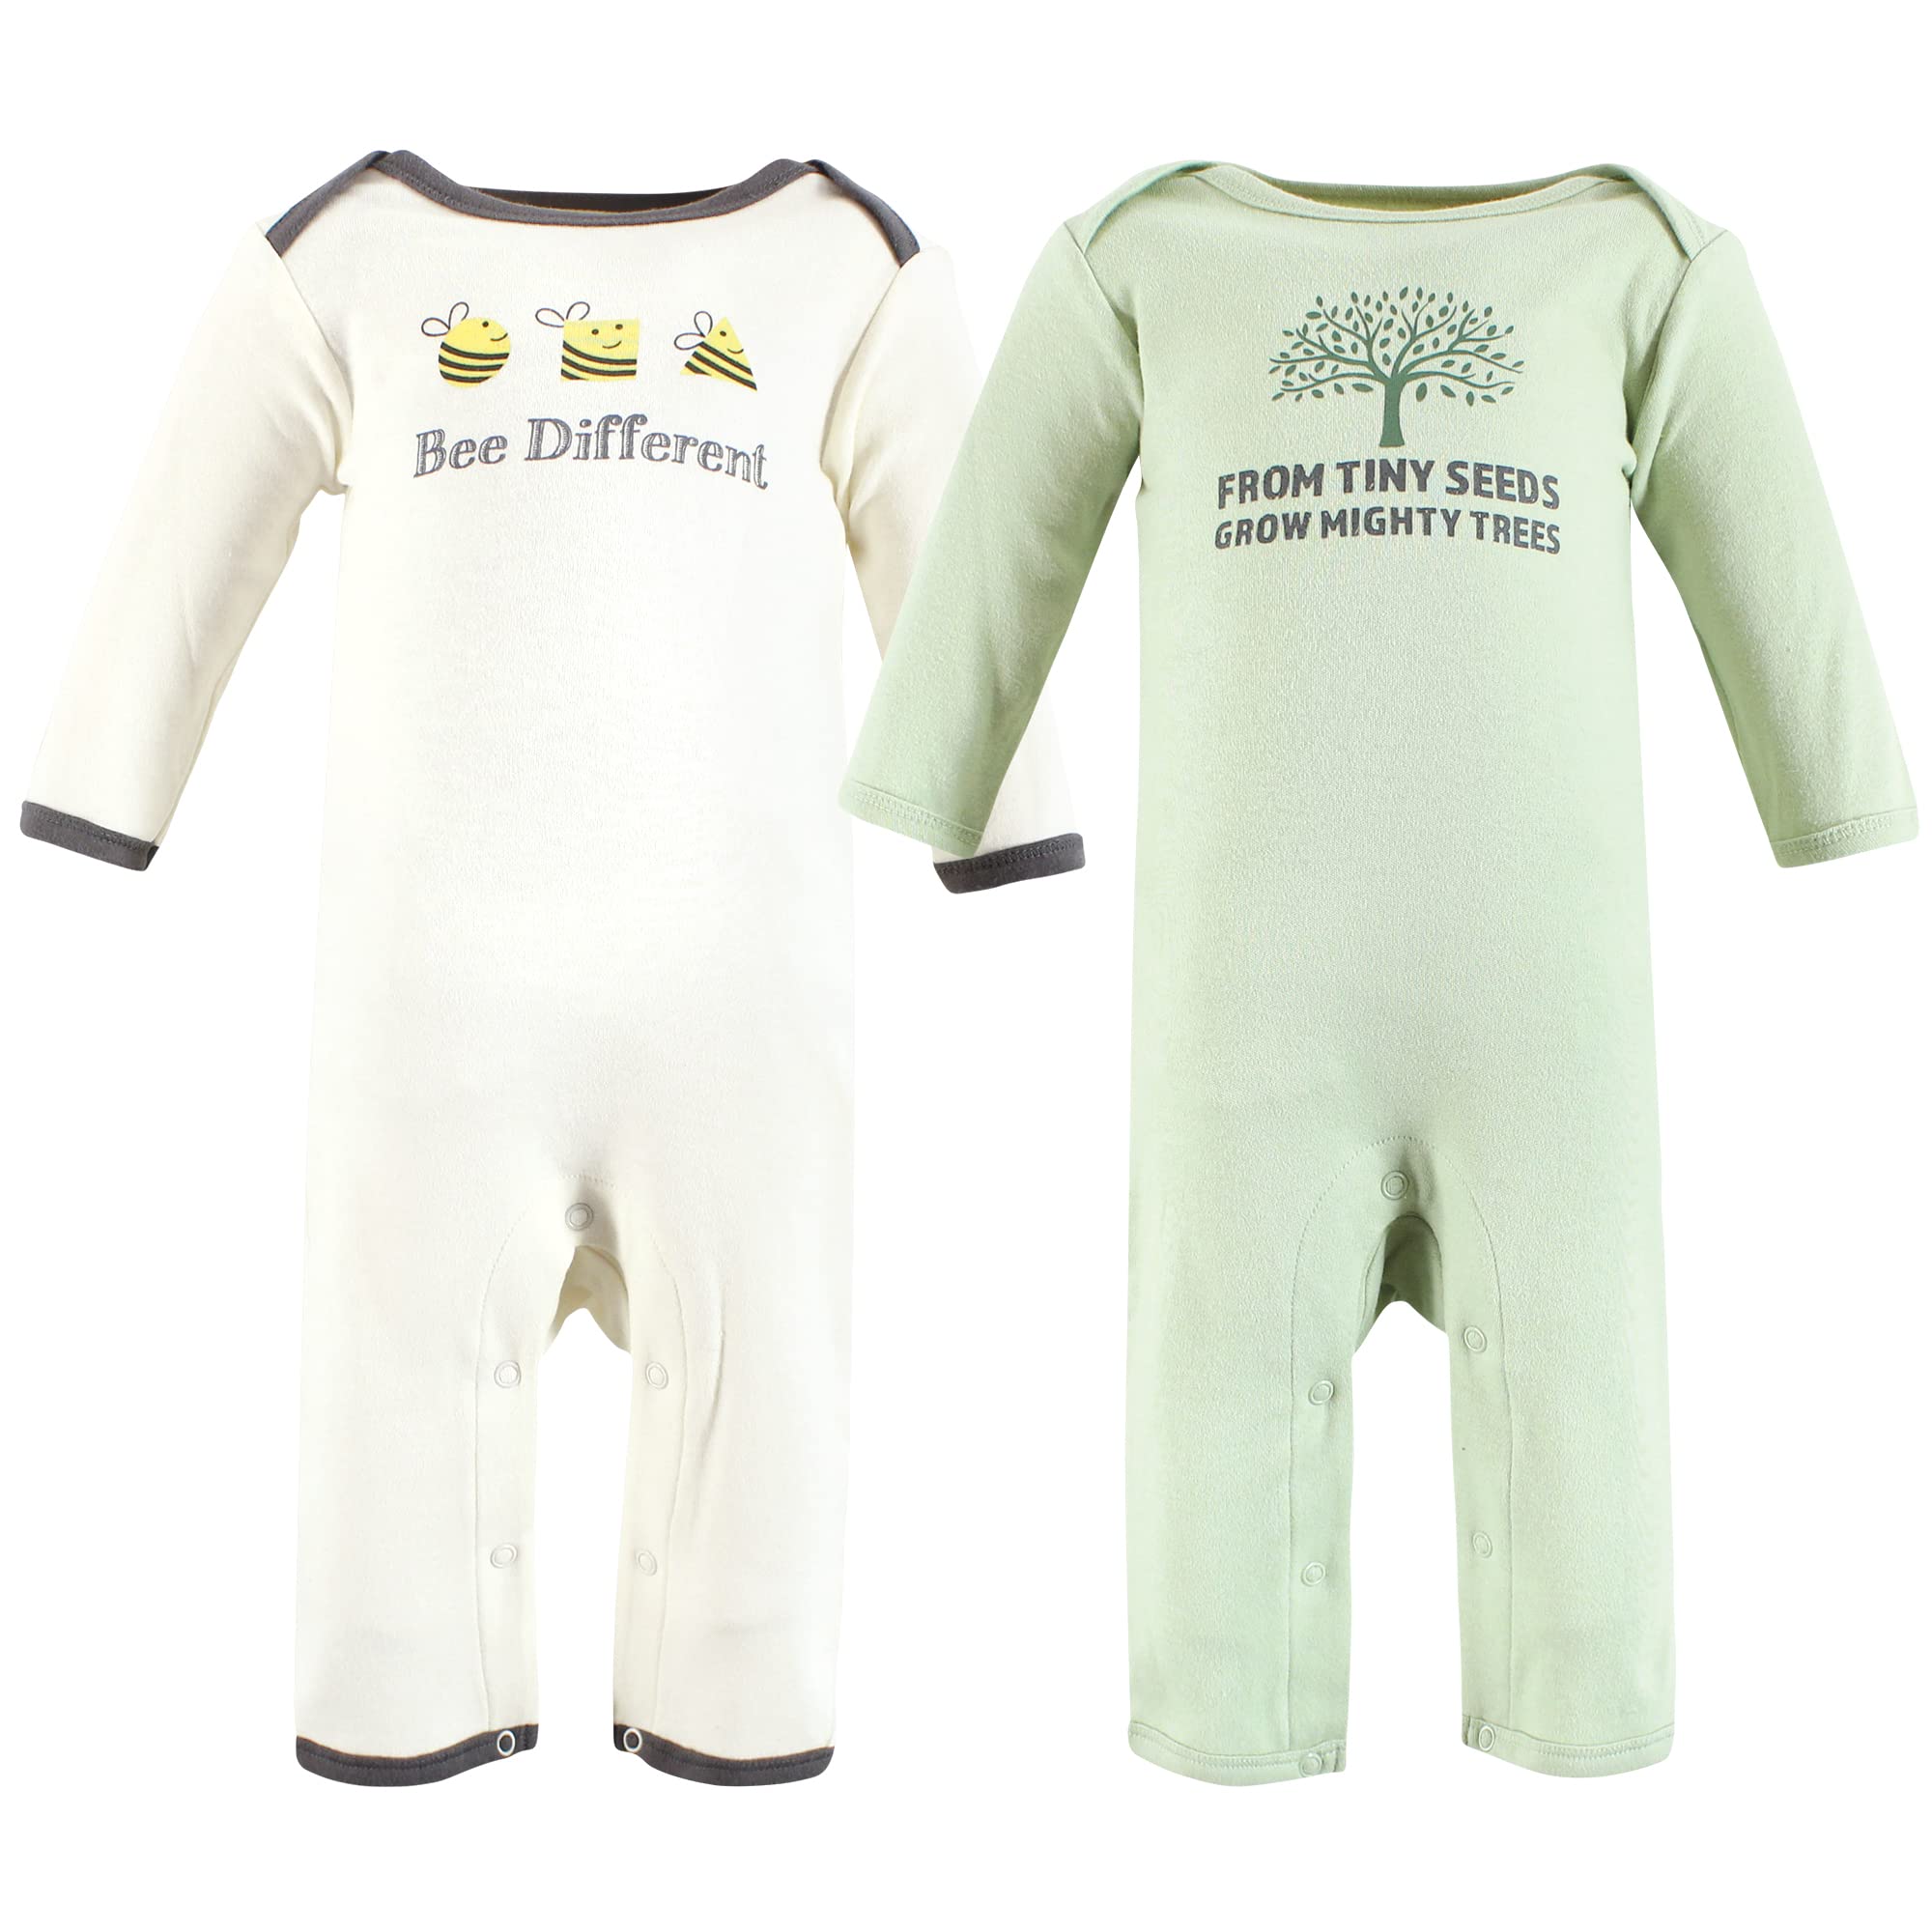 Touched by Nature Unisex Baby Organic Cotton Coveralls, Bee Different, 0-3 Months